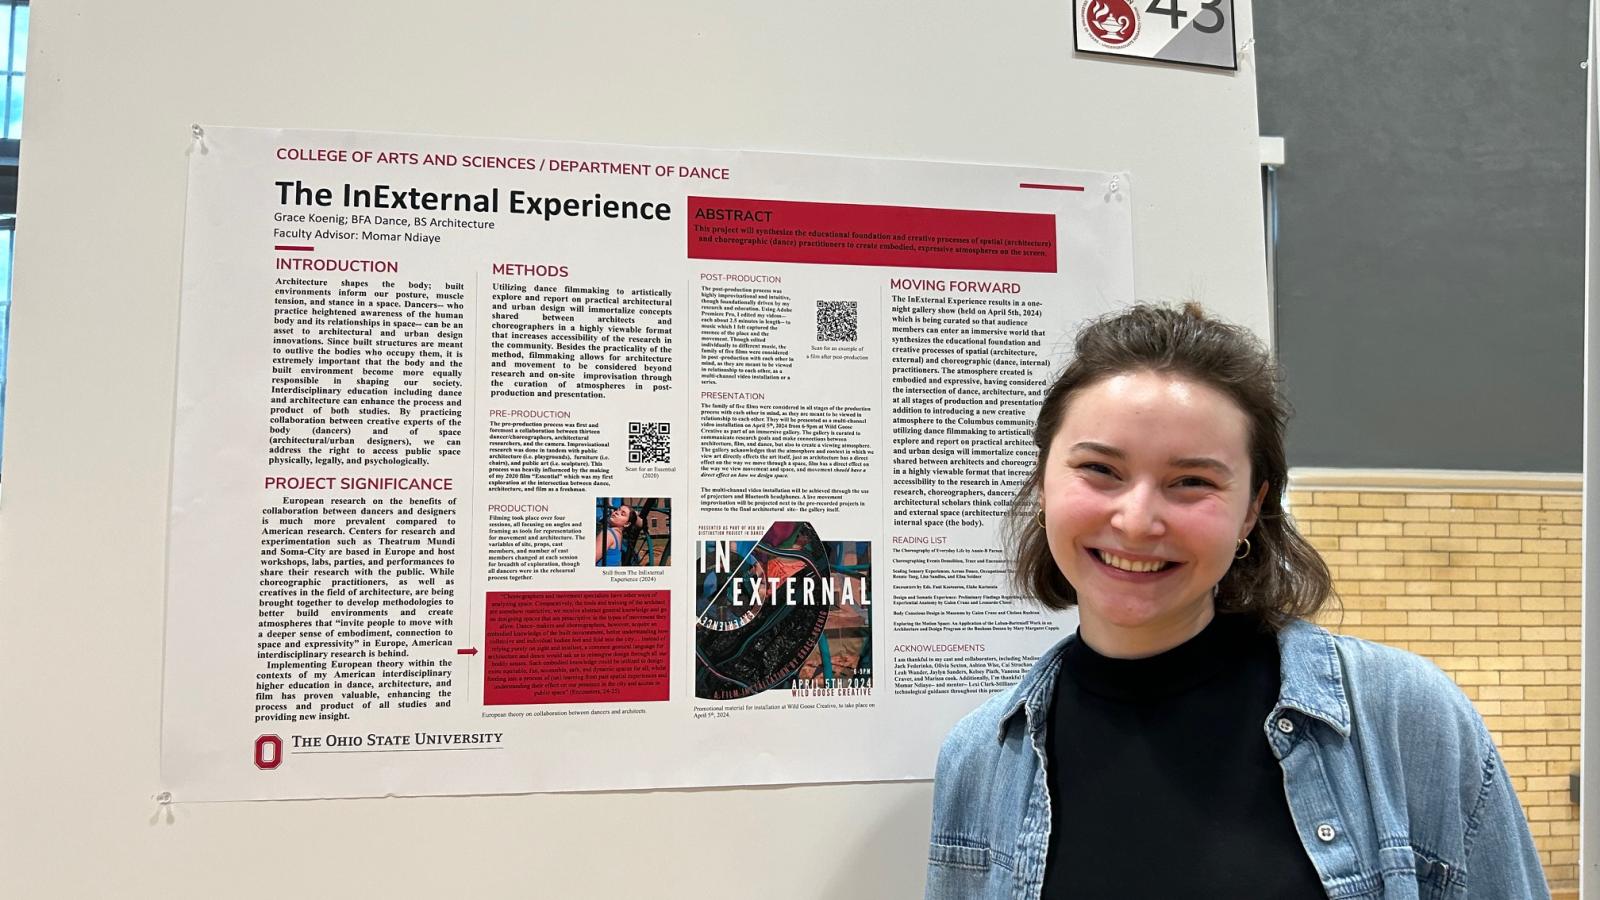 Student posing with research poster.